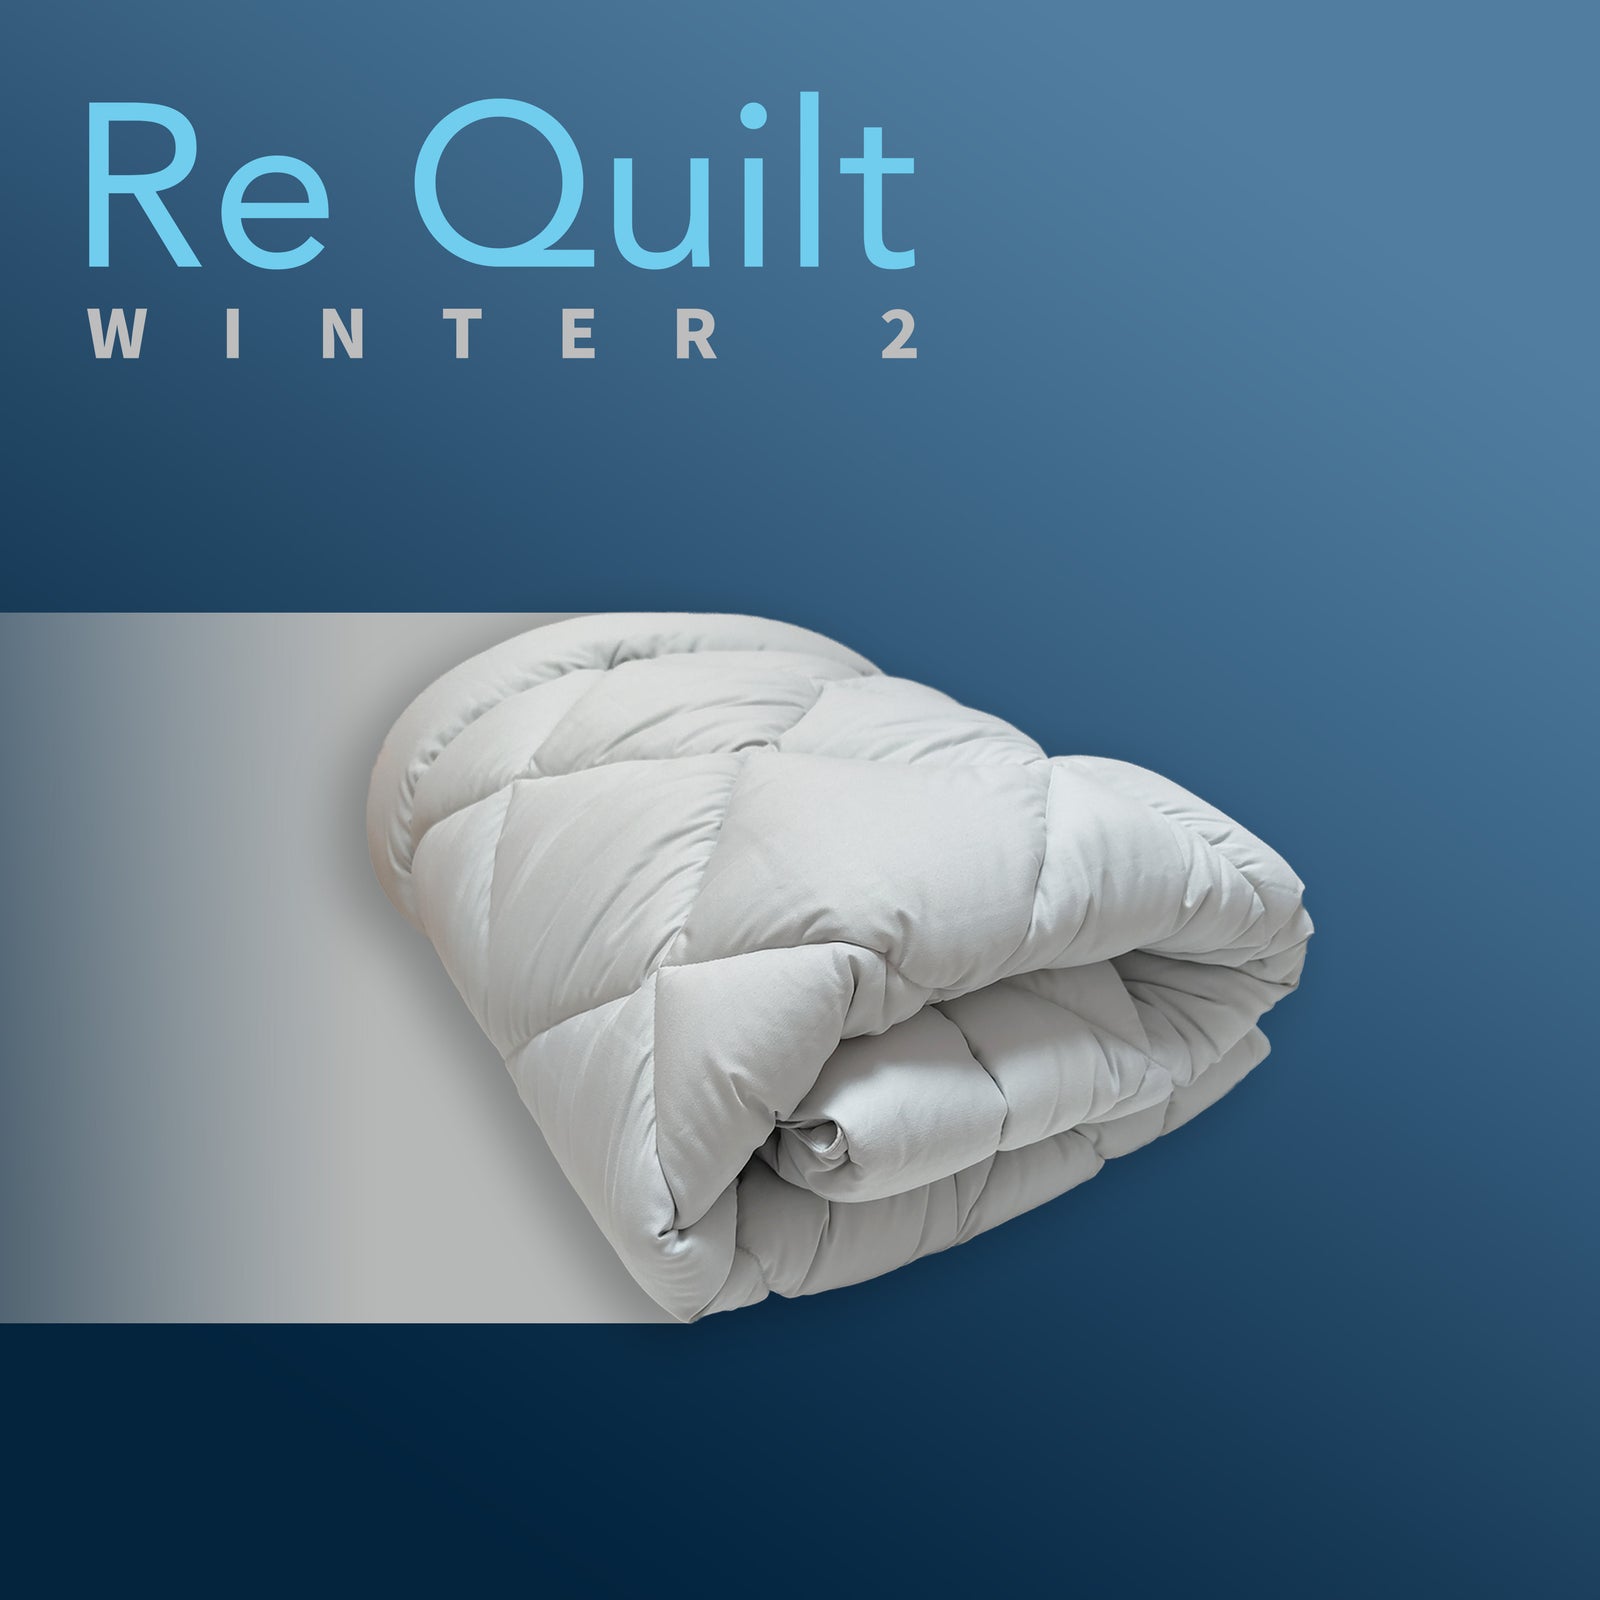 Re Quilt Winter 2 已登場